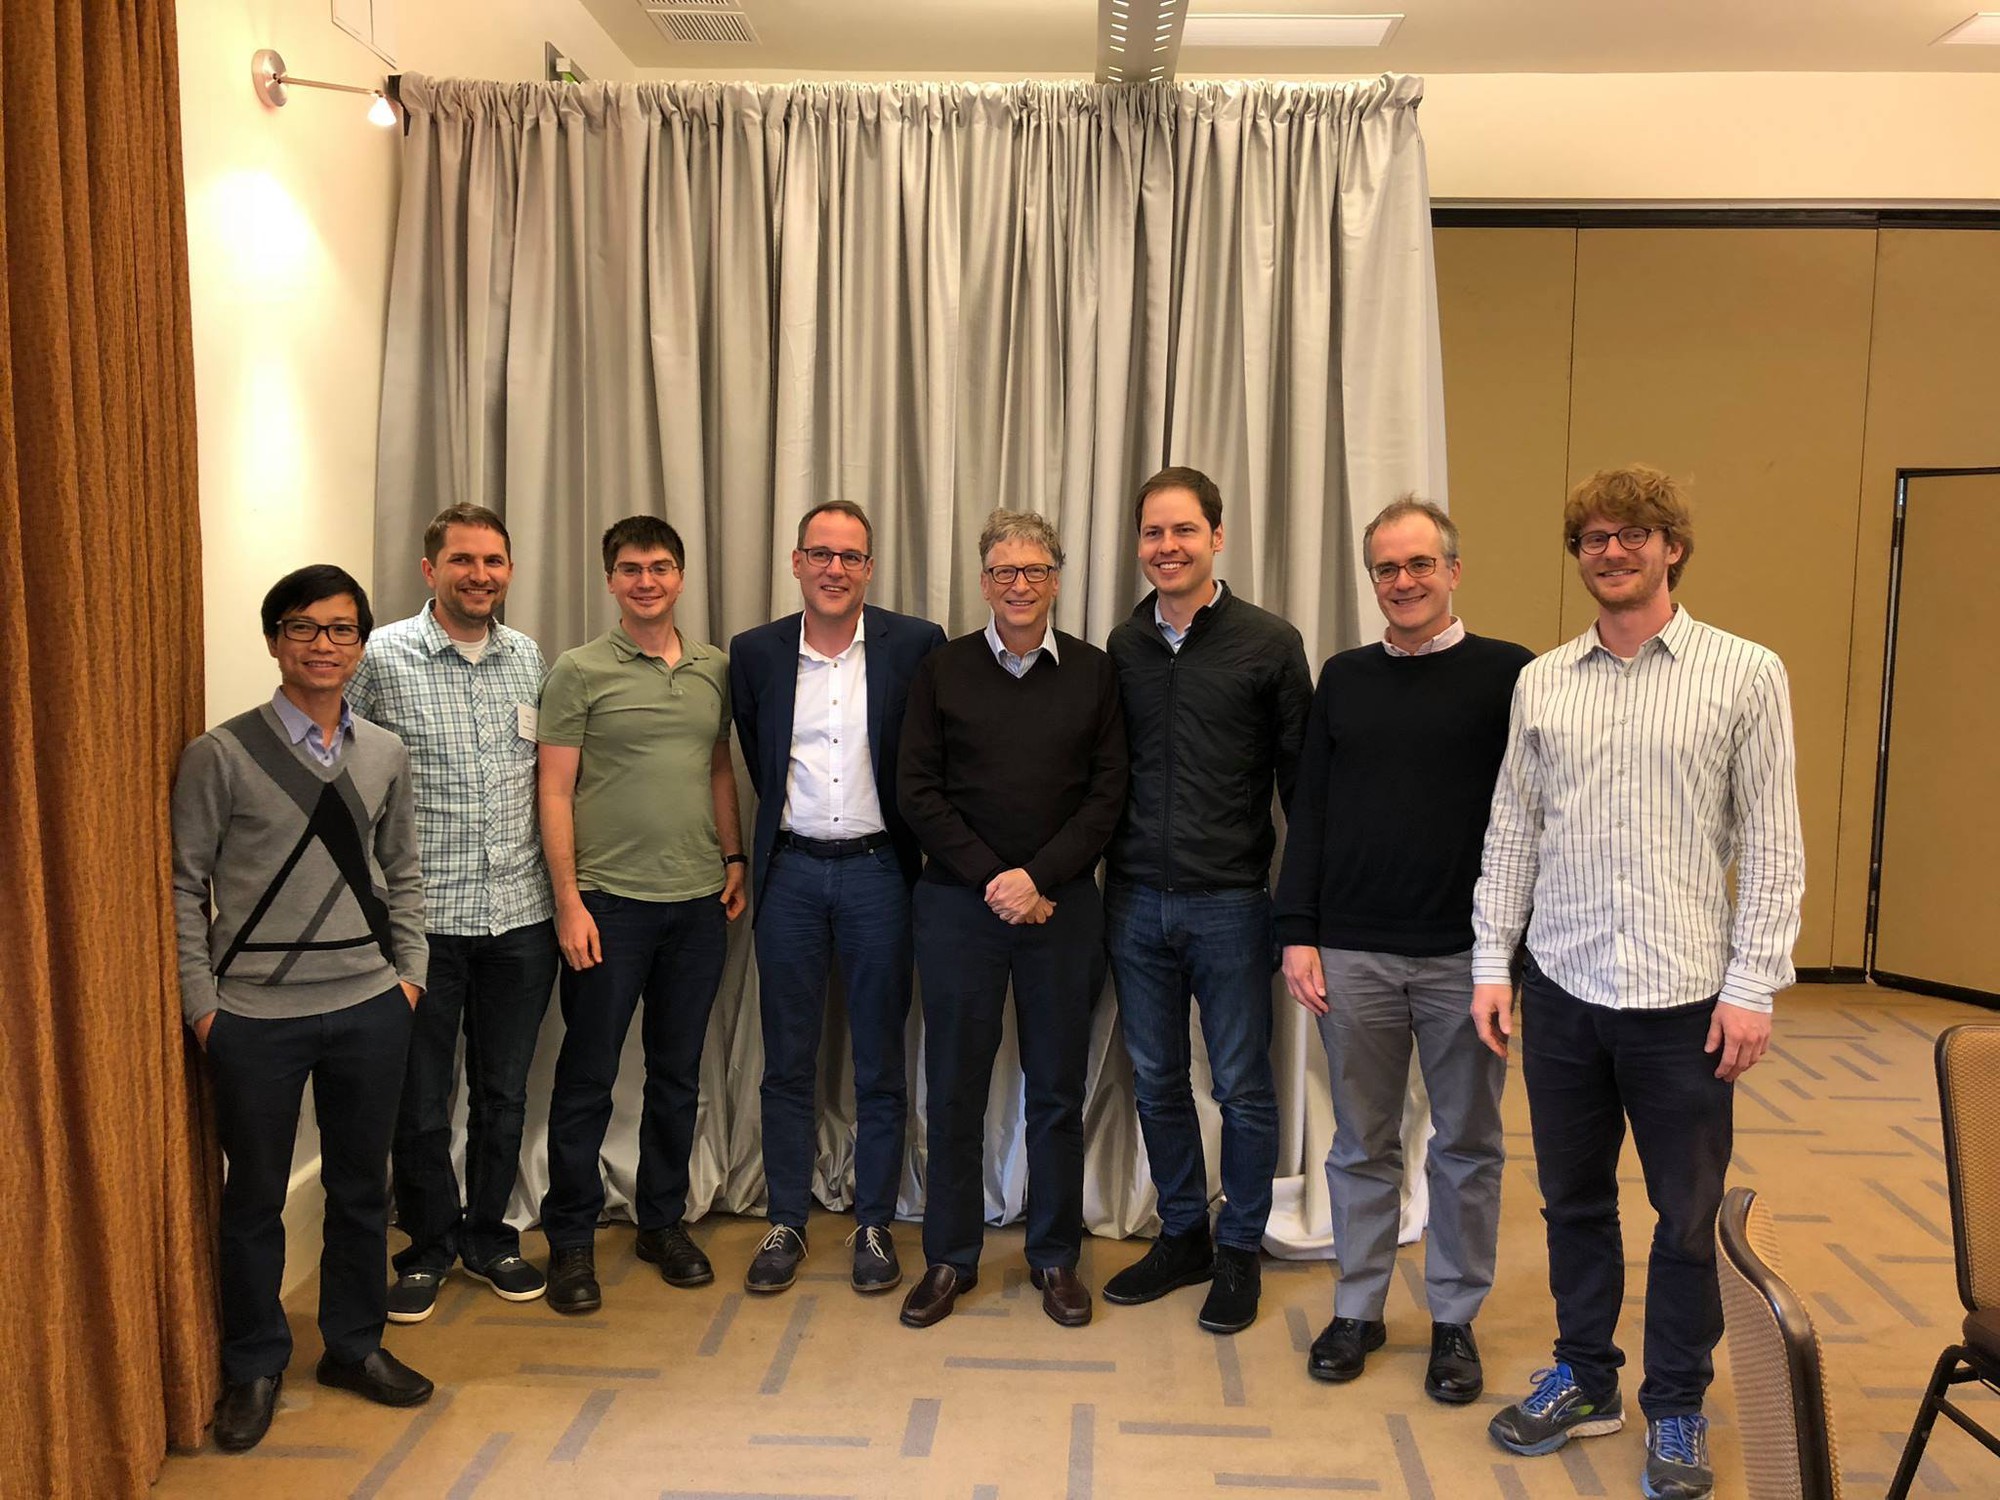 Le Viet Quoc (first left) poses for a picture with Bill Gates and AI experts.